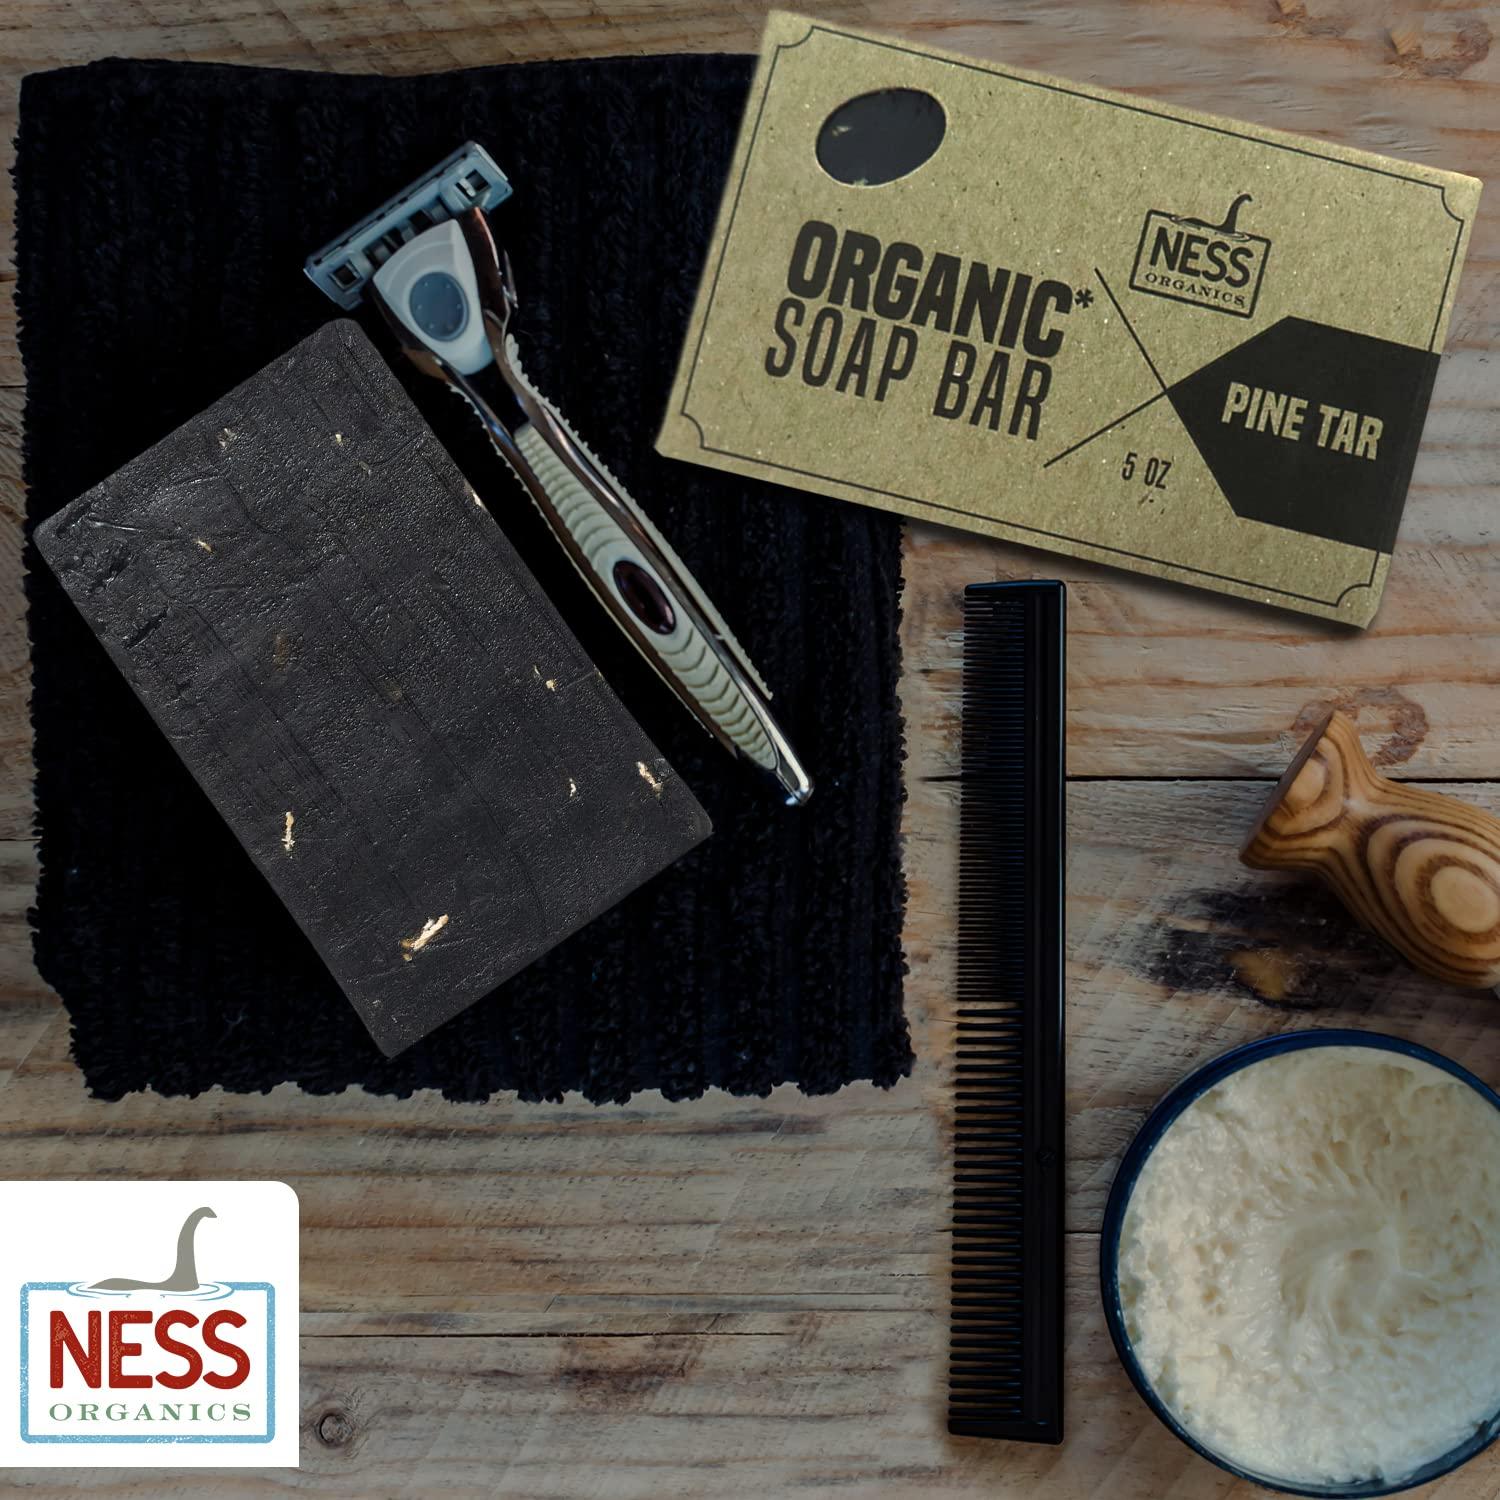 Ness Mens Soap Bar - Pine Tar Scent, Natural Soap For Men With Organic  Ingredients, Mens Bar Soap Wi…See more Ness Mens Soap Bar - Pine Tar Scent